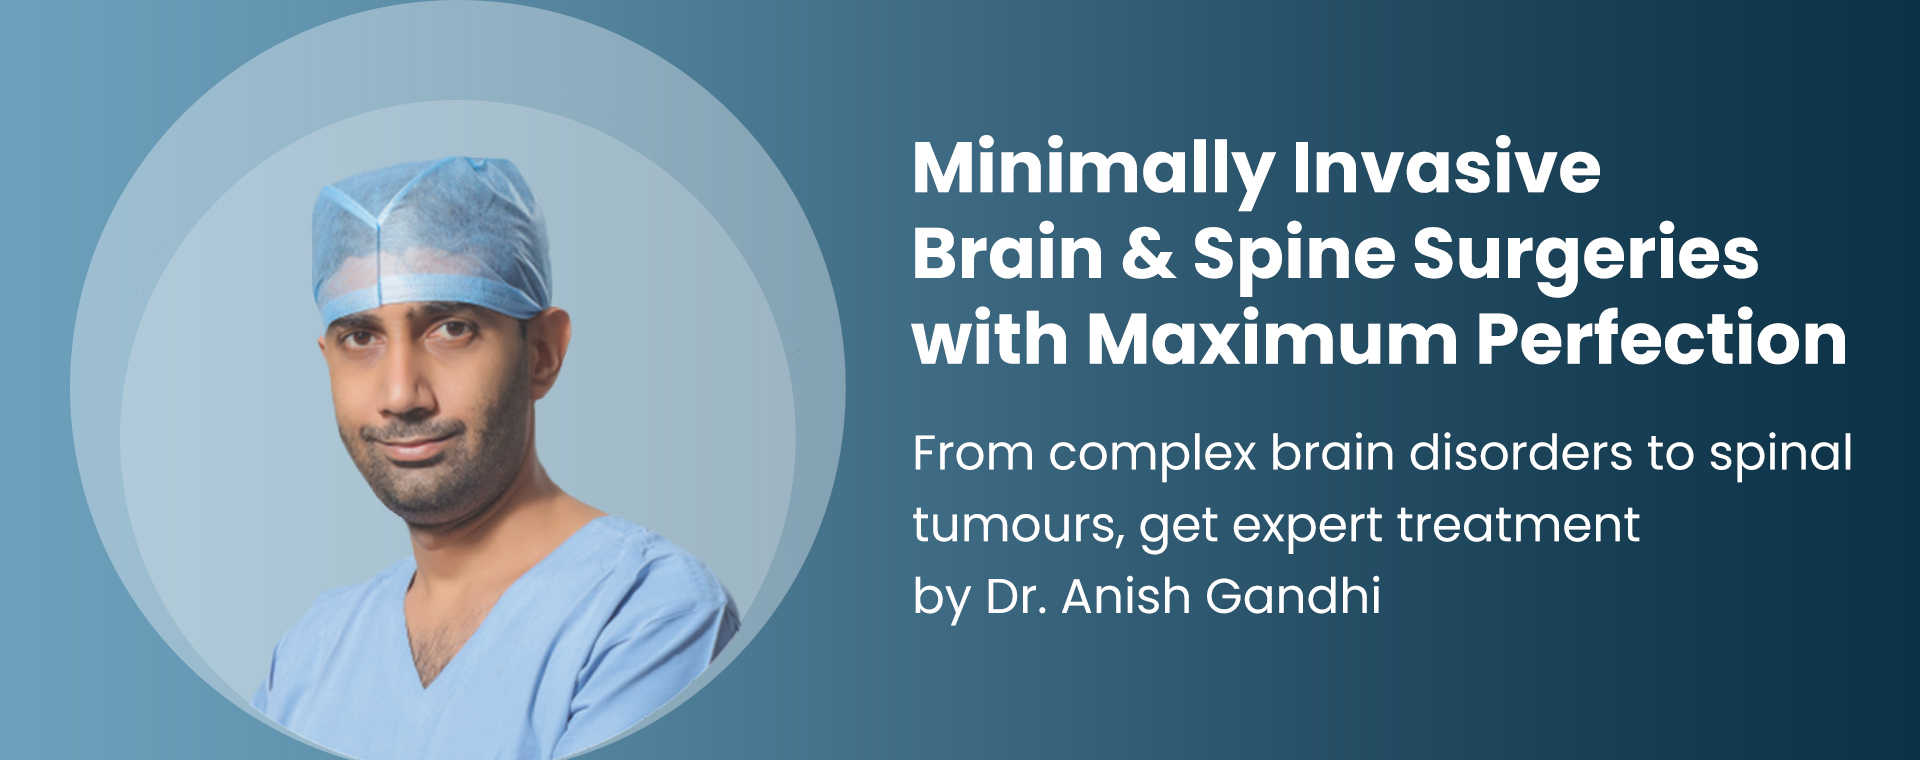 Minimally Invasive Brain And Spine Surgeries With Maximum Perfection